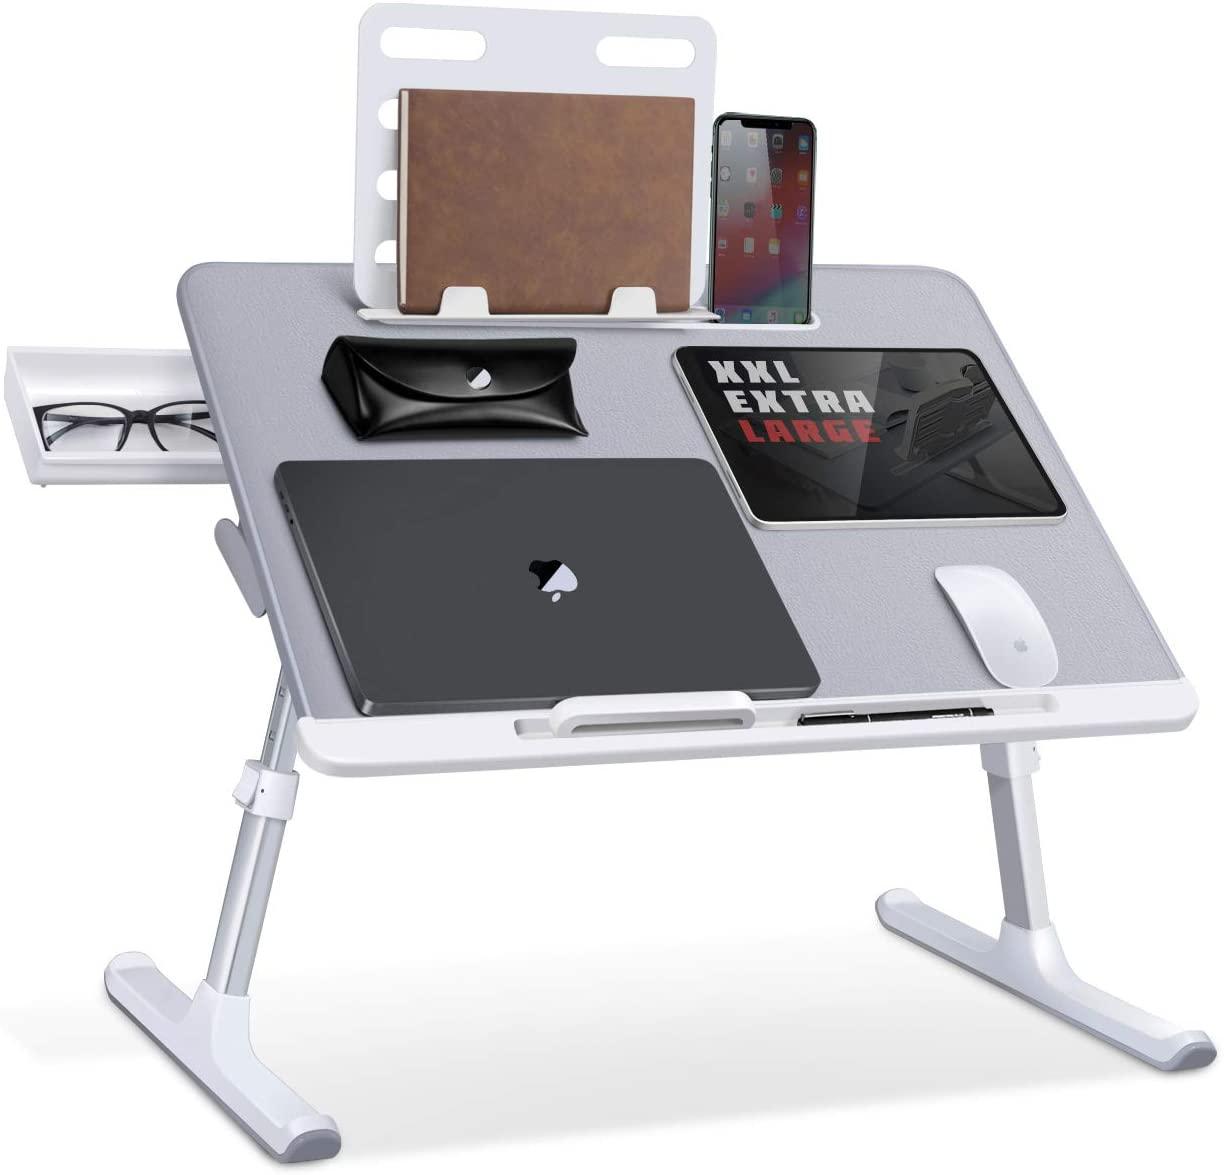 Adjustable Laptop Stand for Bed for $43.75 Shipped